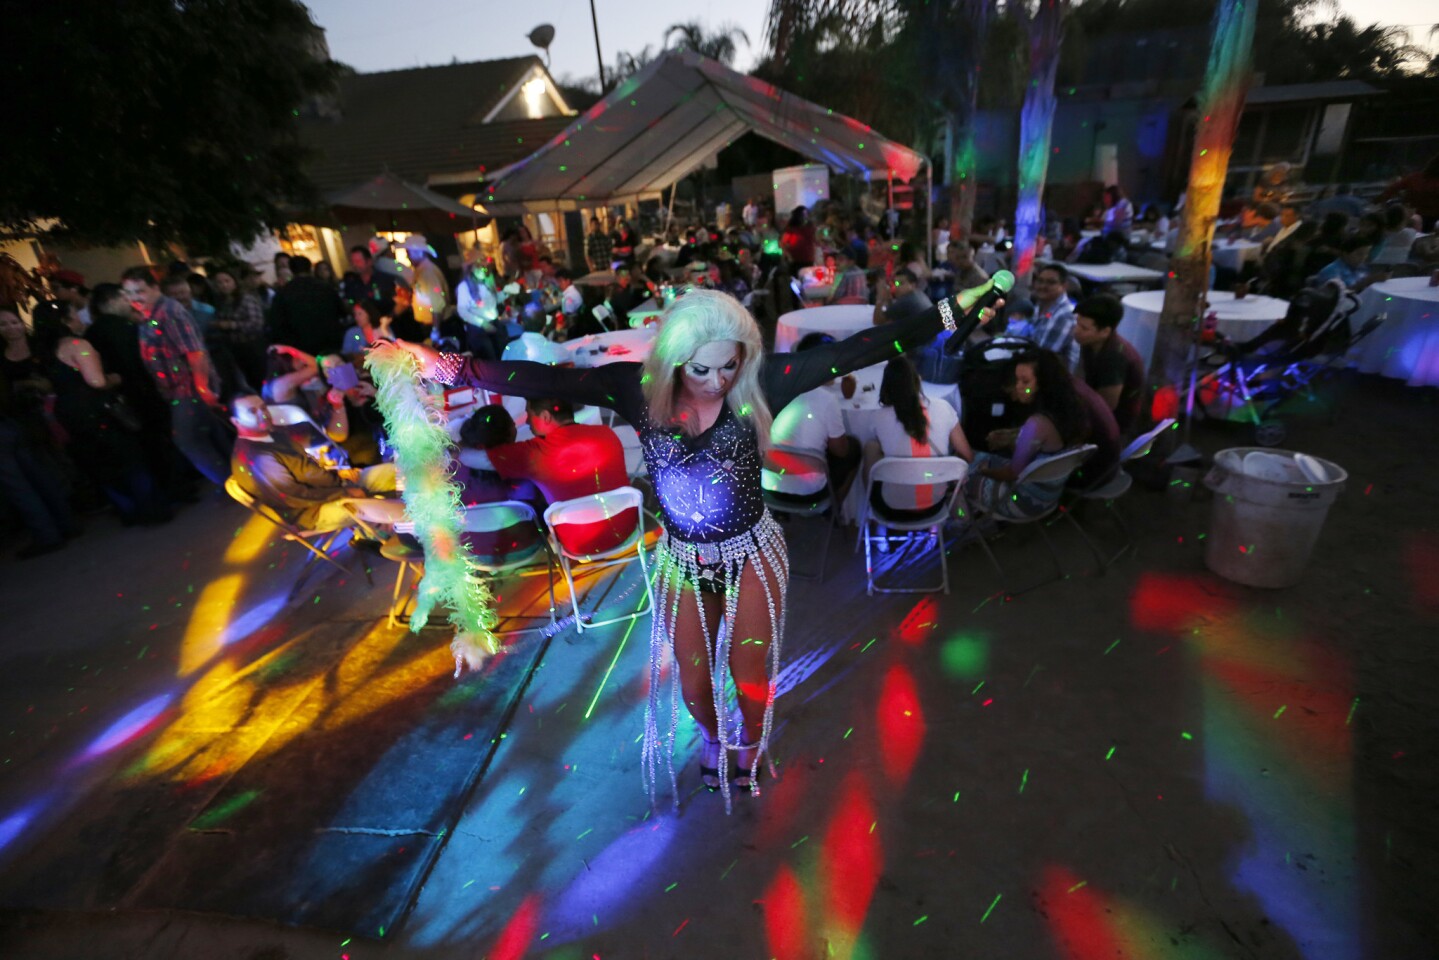 An entertainer sings and dances in a La Puente backyard during a festival reminiscent of those held in Ocotlan, Mexico.